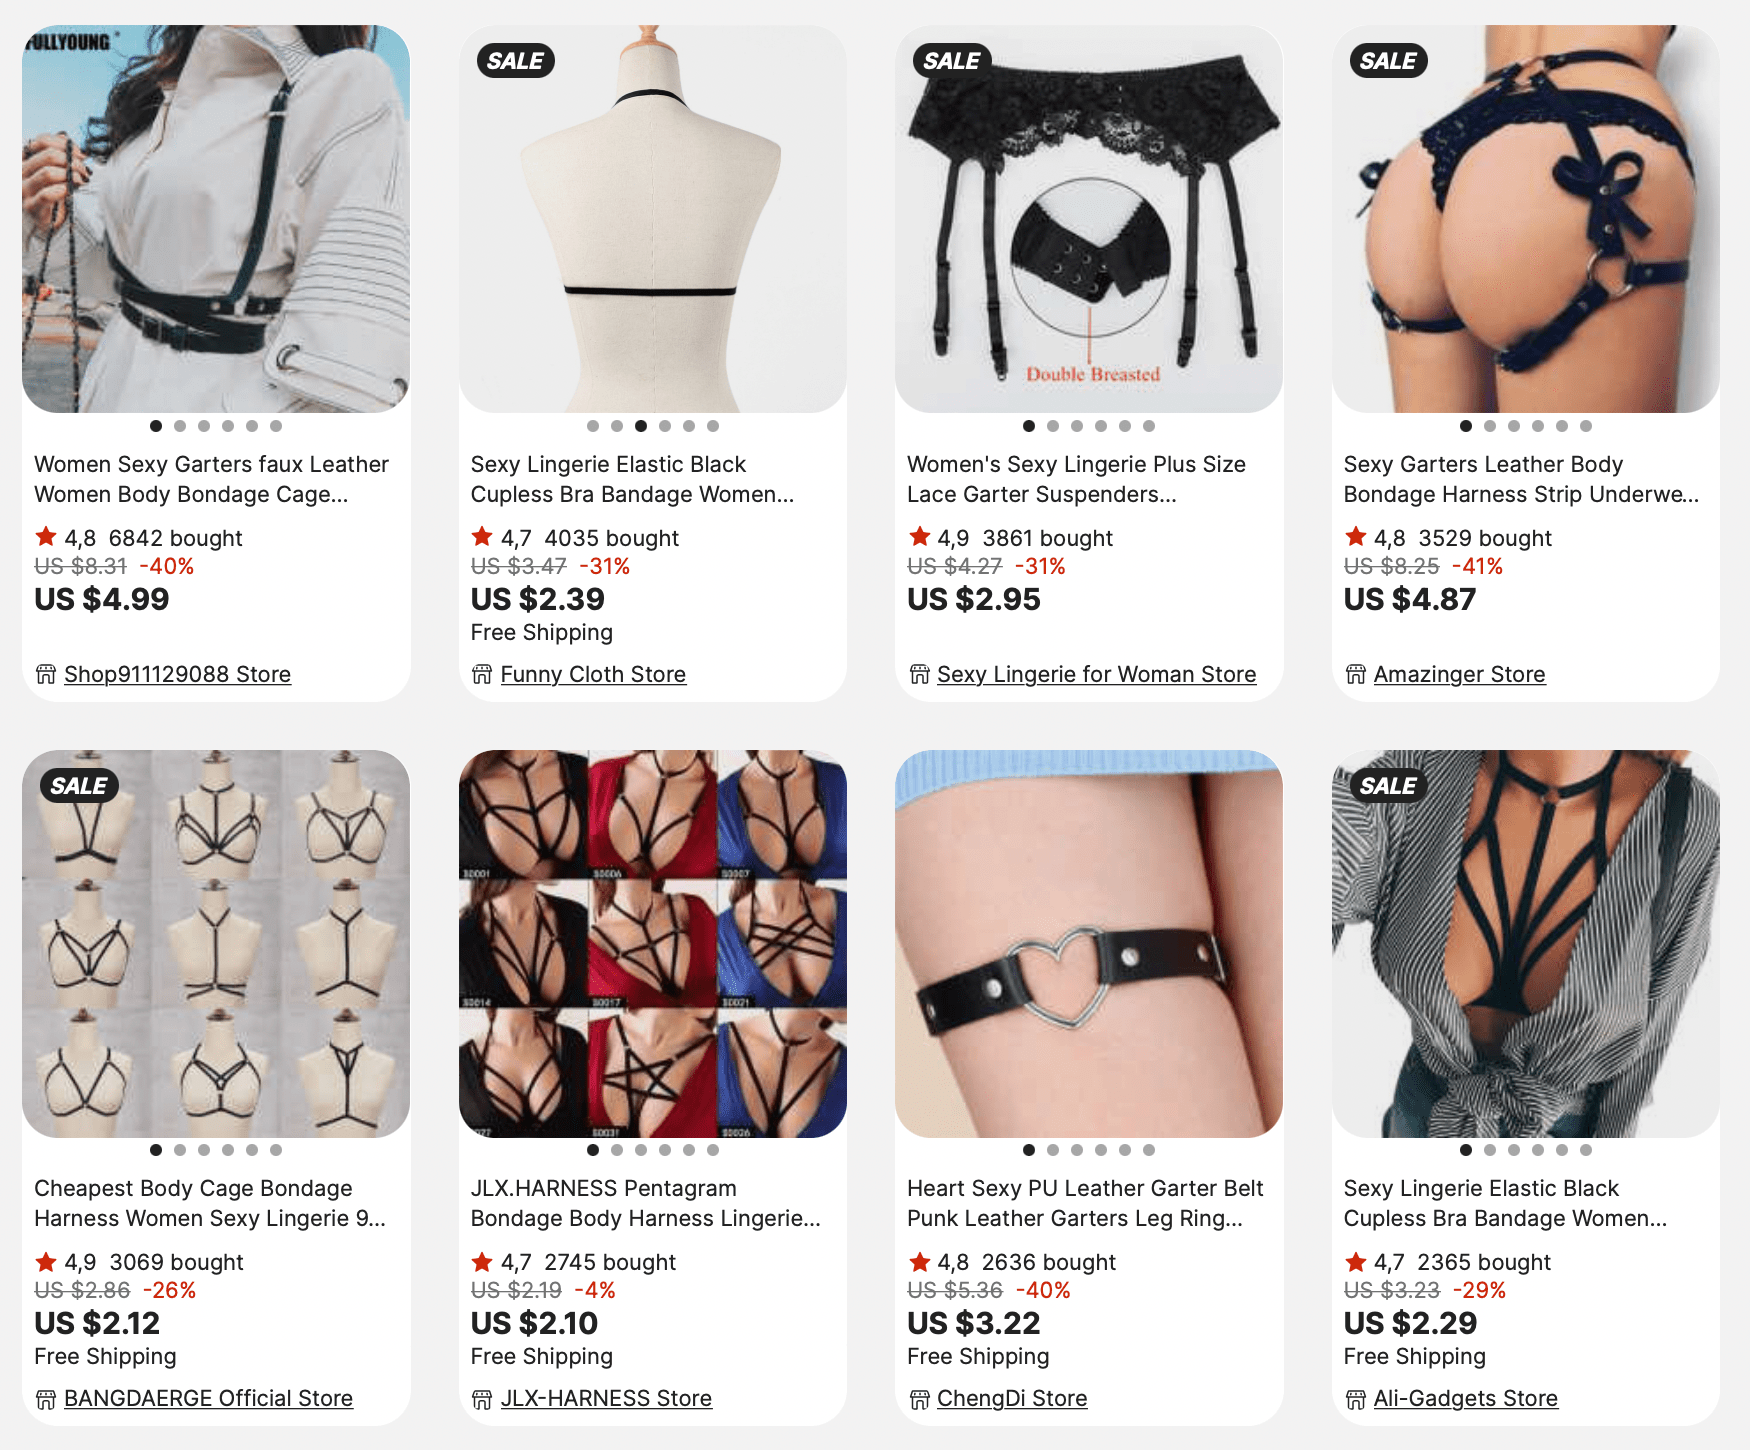 Dropship Lingerie: How To Build A Lucrative Online Store?